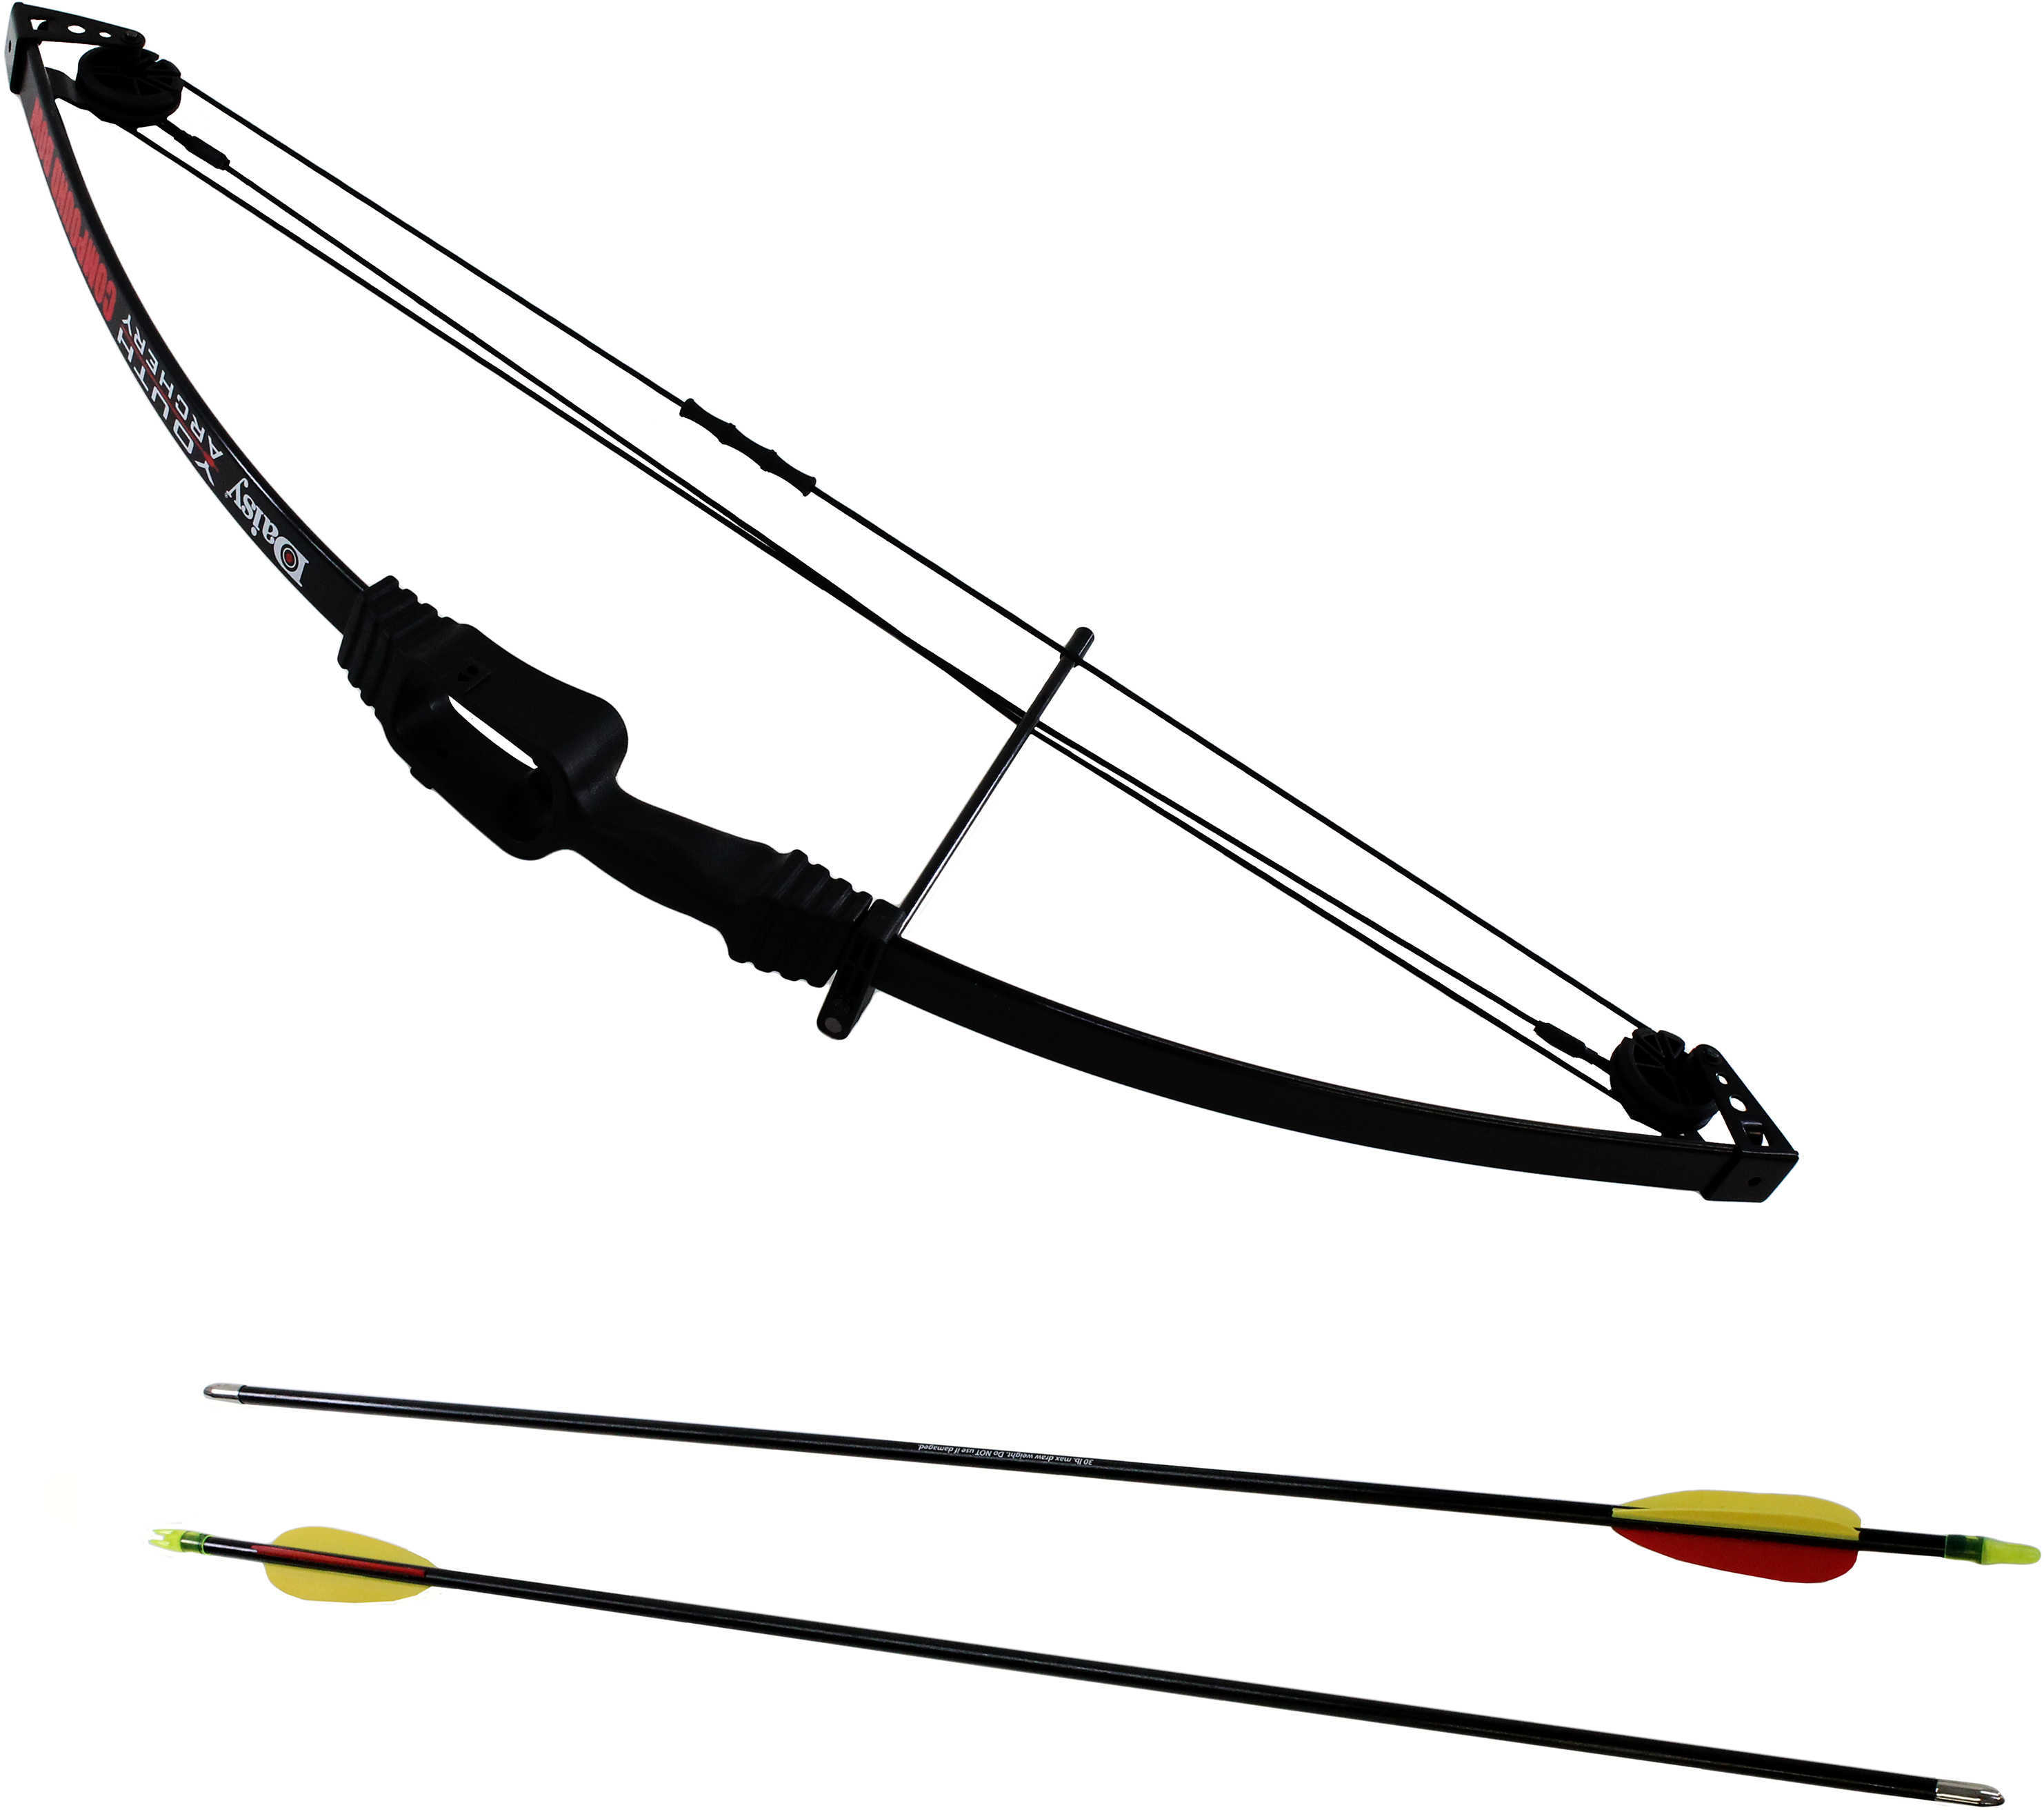 Daisy Youth Compound Bow Model: 4002